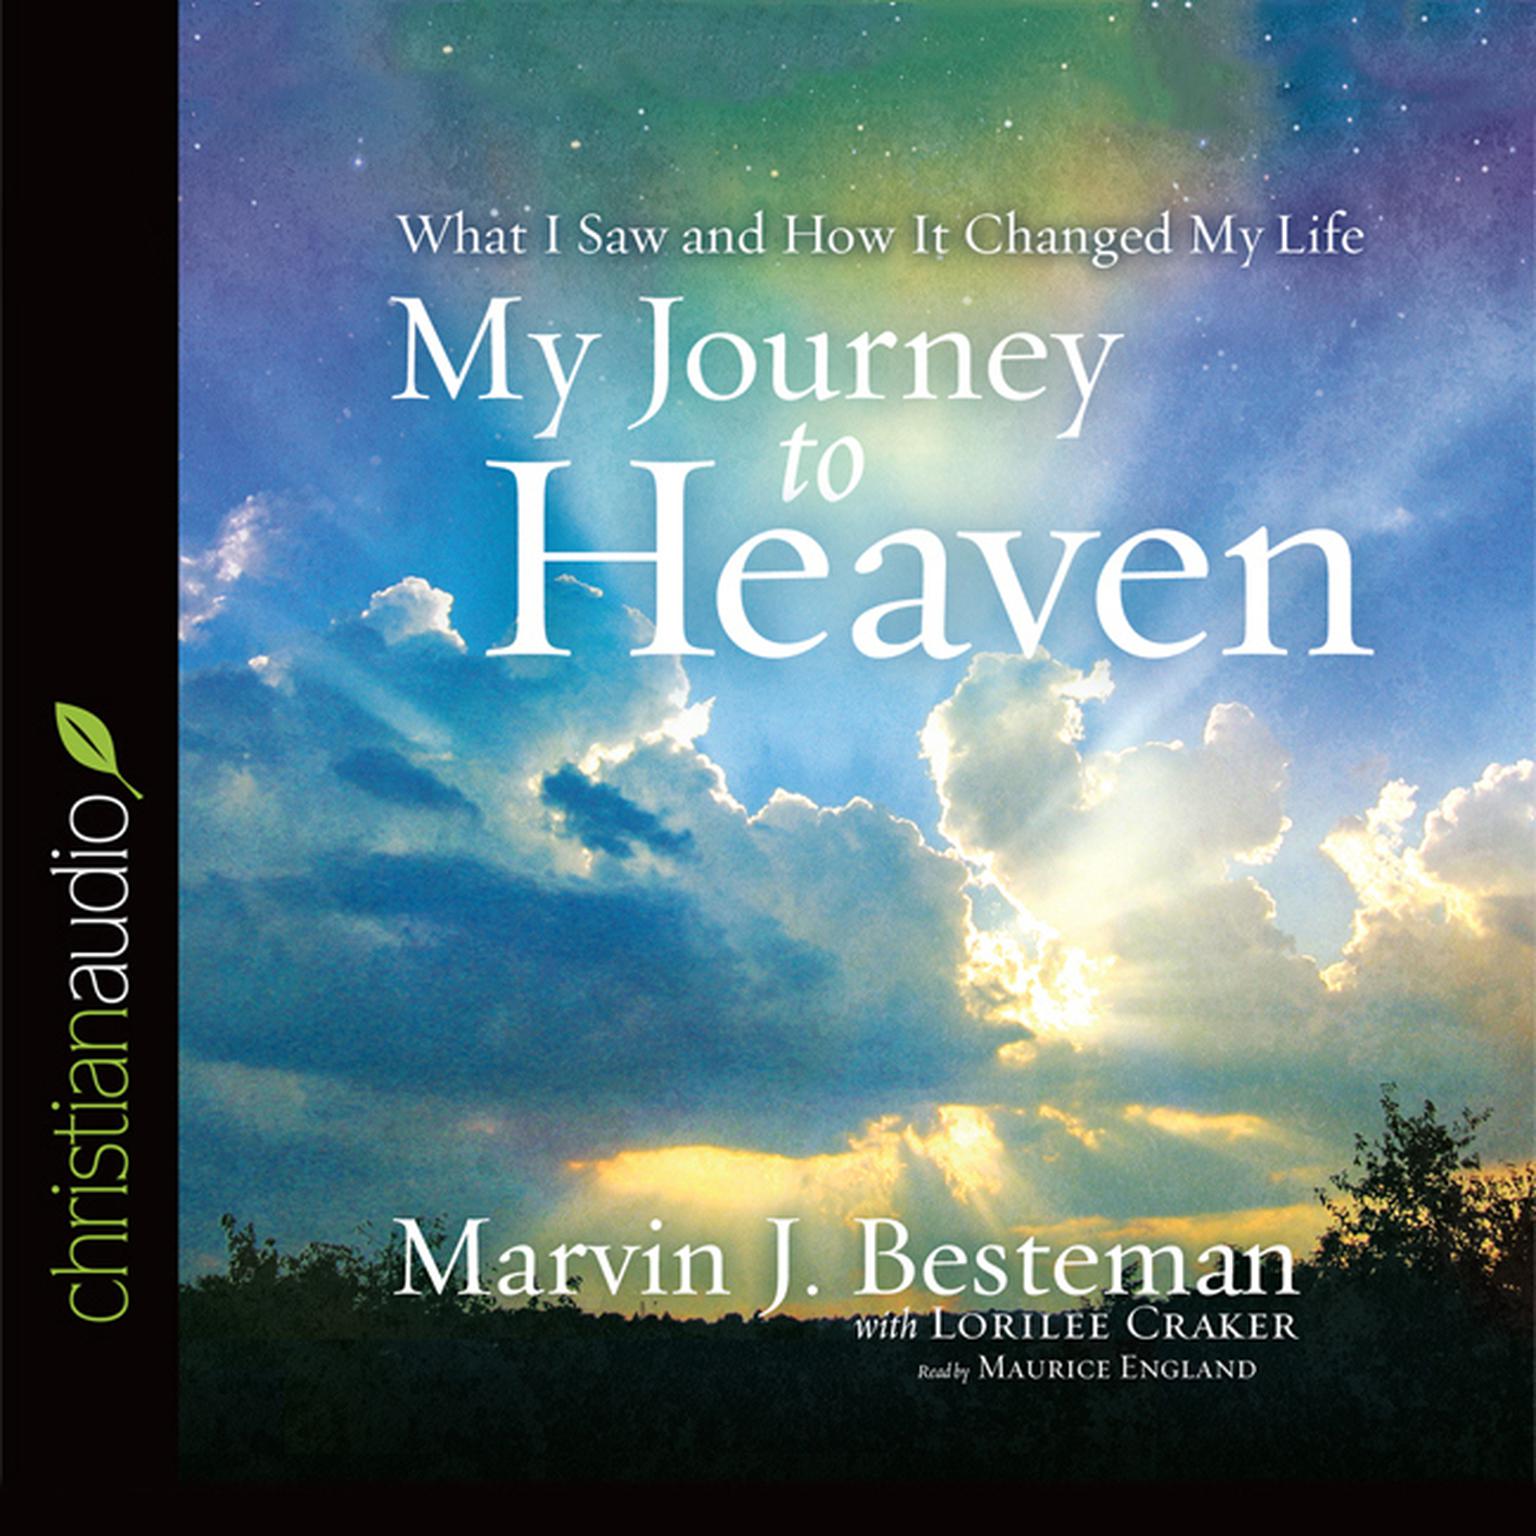 My Journey to Heaven: What I Saw and How It Changed My Life Audiobook, by Martin J. Besteman